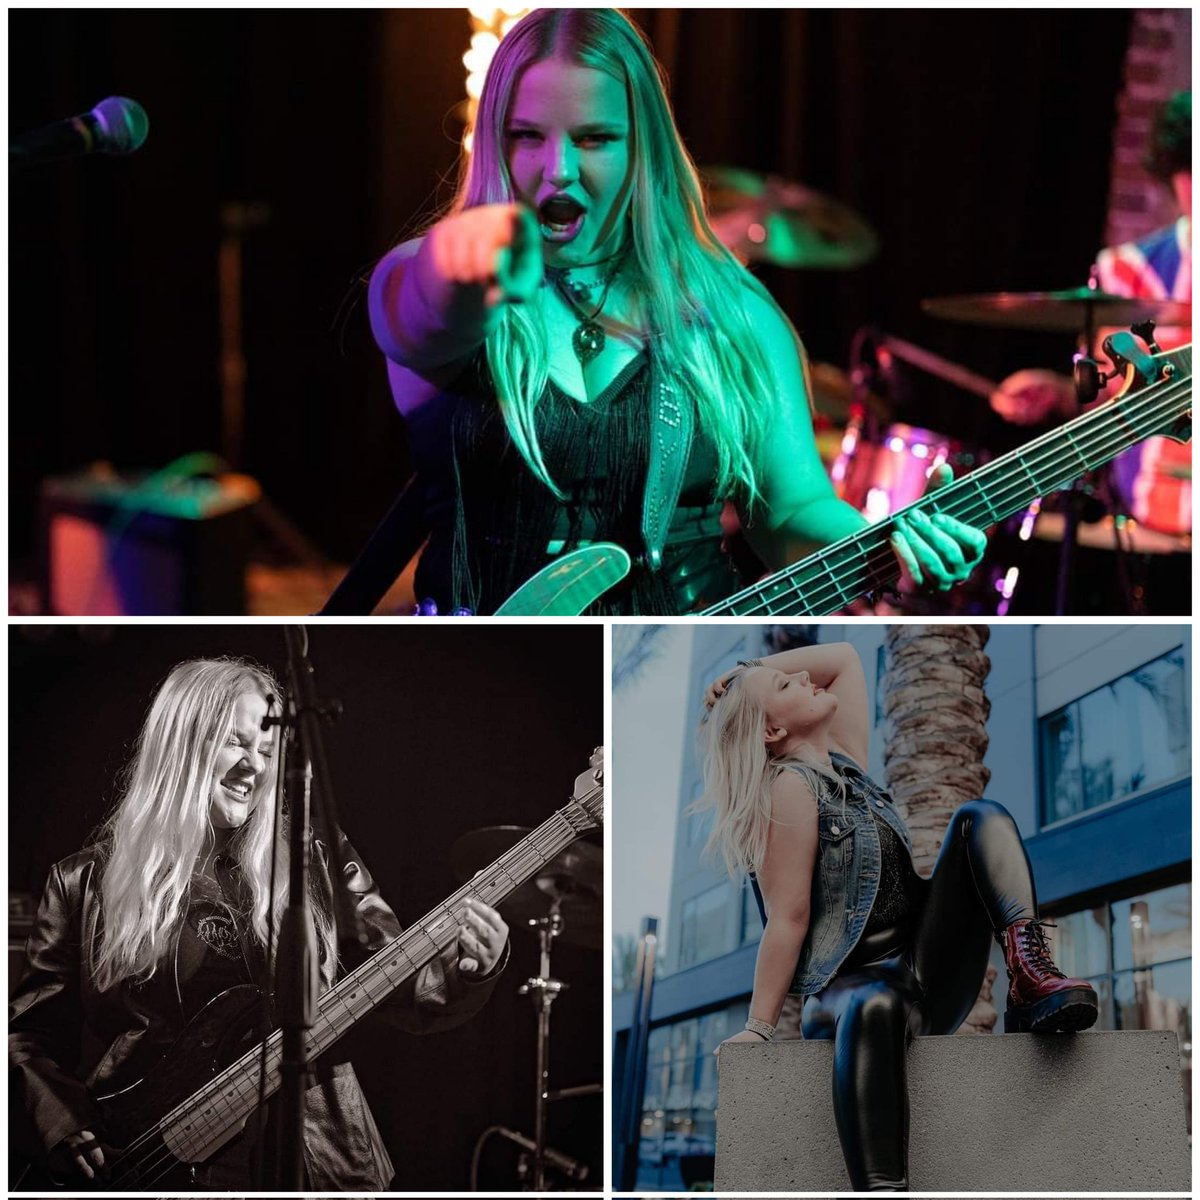 Stoked to be covering @abbykrocks tonight in Nashville, Tennessee! I'm Music Magazine Photographer/Writer Kris Cagle will be geared up and photographing her at @five_spot! #Abbyk #bass #Nashville #the5spot